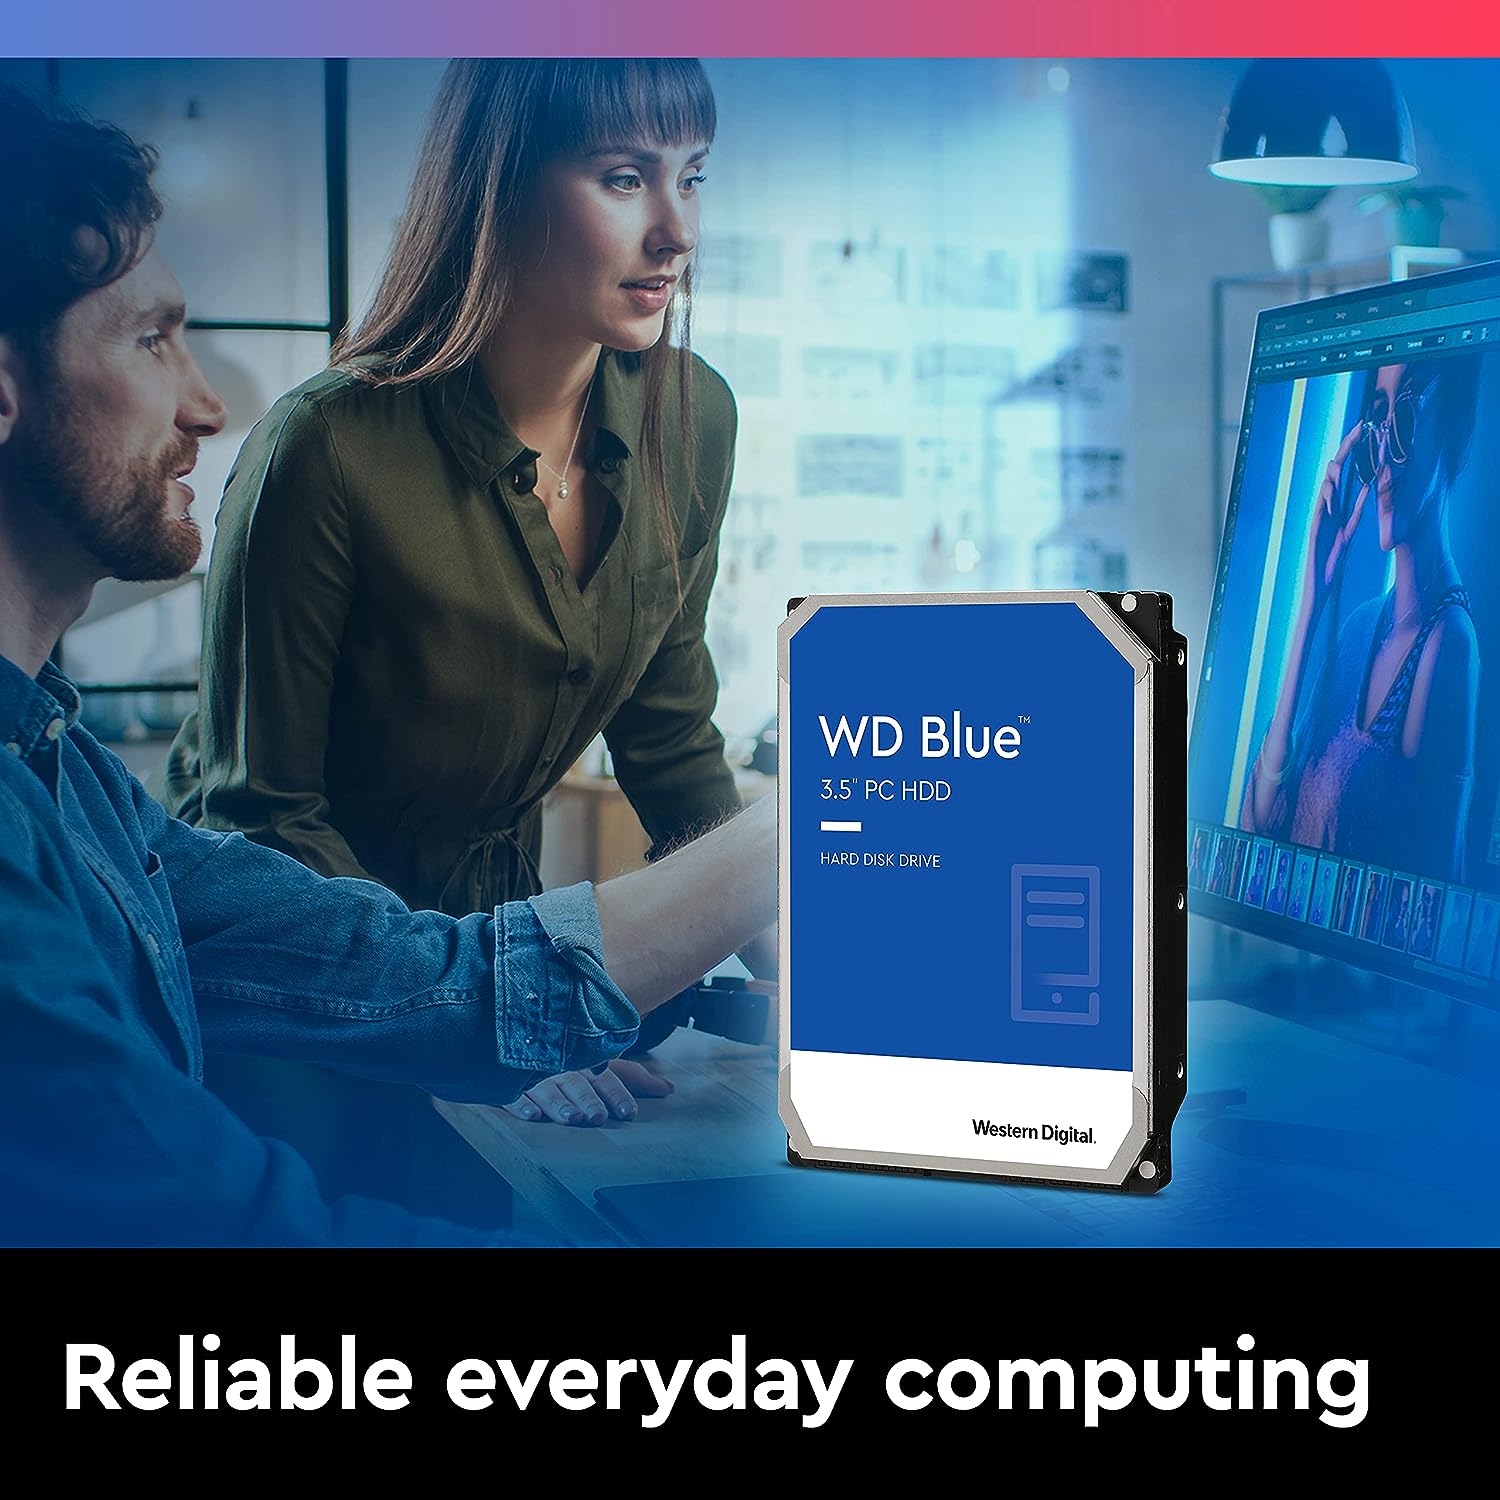 A large marketing image providing additional information about the product WD Blue 3.5" Desktop HDD - 3TB 256MB - Additional alt info not provided